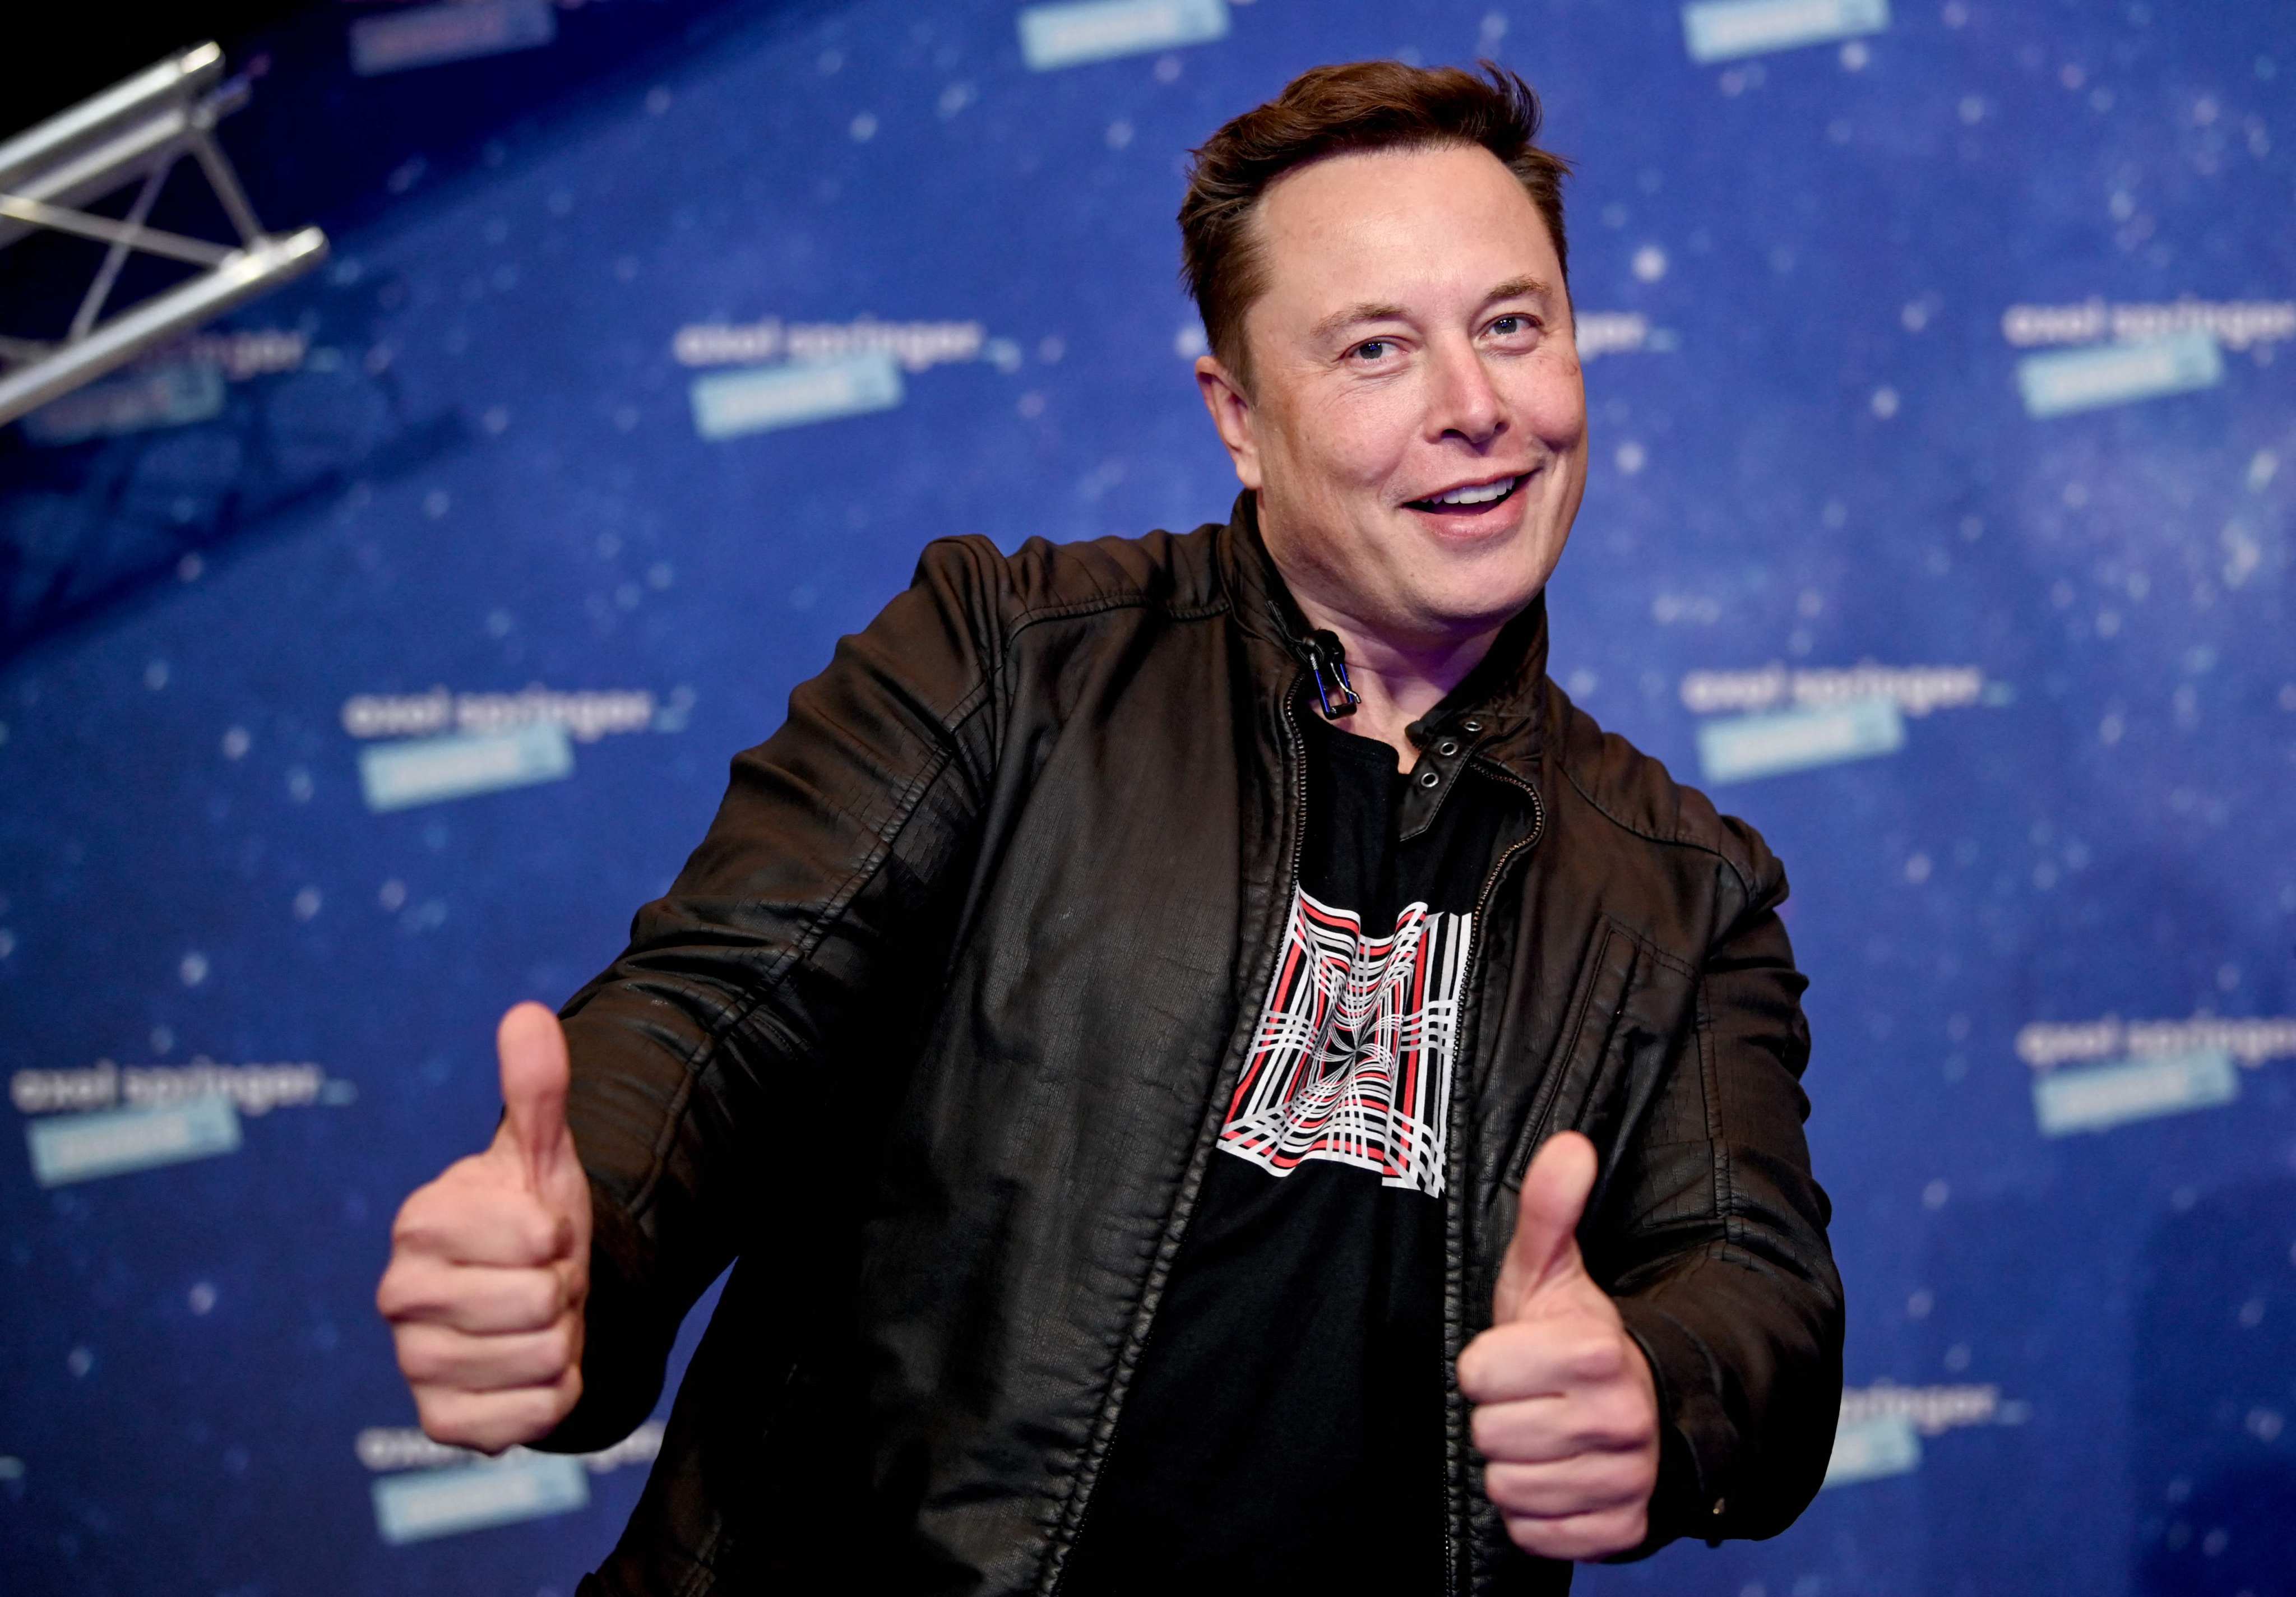 In this file photo taken on December 1, 2020 SpaceX owner and Tesla CEO Elon Musk poses as he arrives for an awards ceremony in Berlin. Musk, a strong clean energy supporter, said in a post on Weibo two months earlier that “sustainable energy generation from sun and wind is making great progress”. Photo: AFP